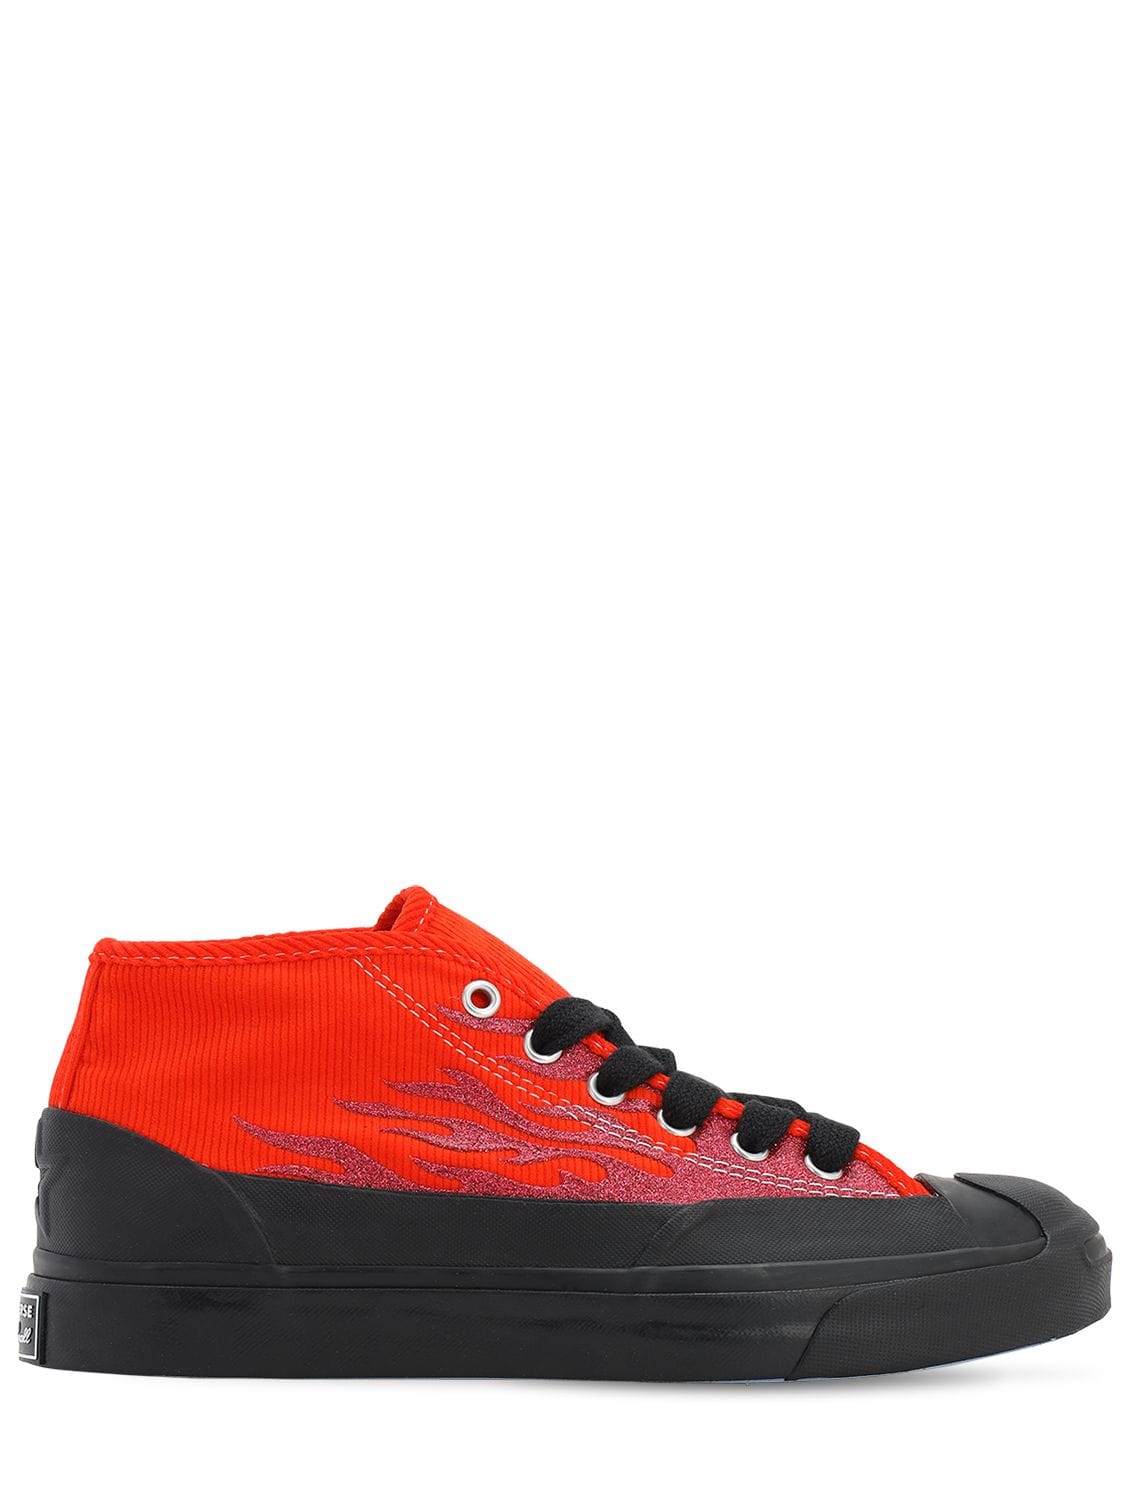 Image of Asap Nast Jack Purcell Chukka Sneakers